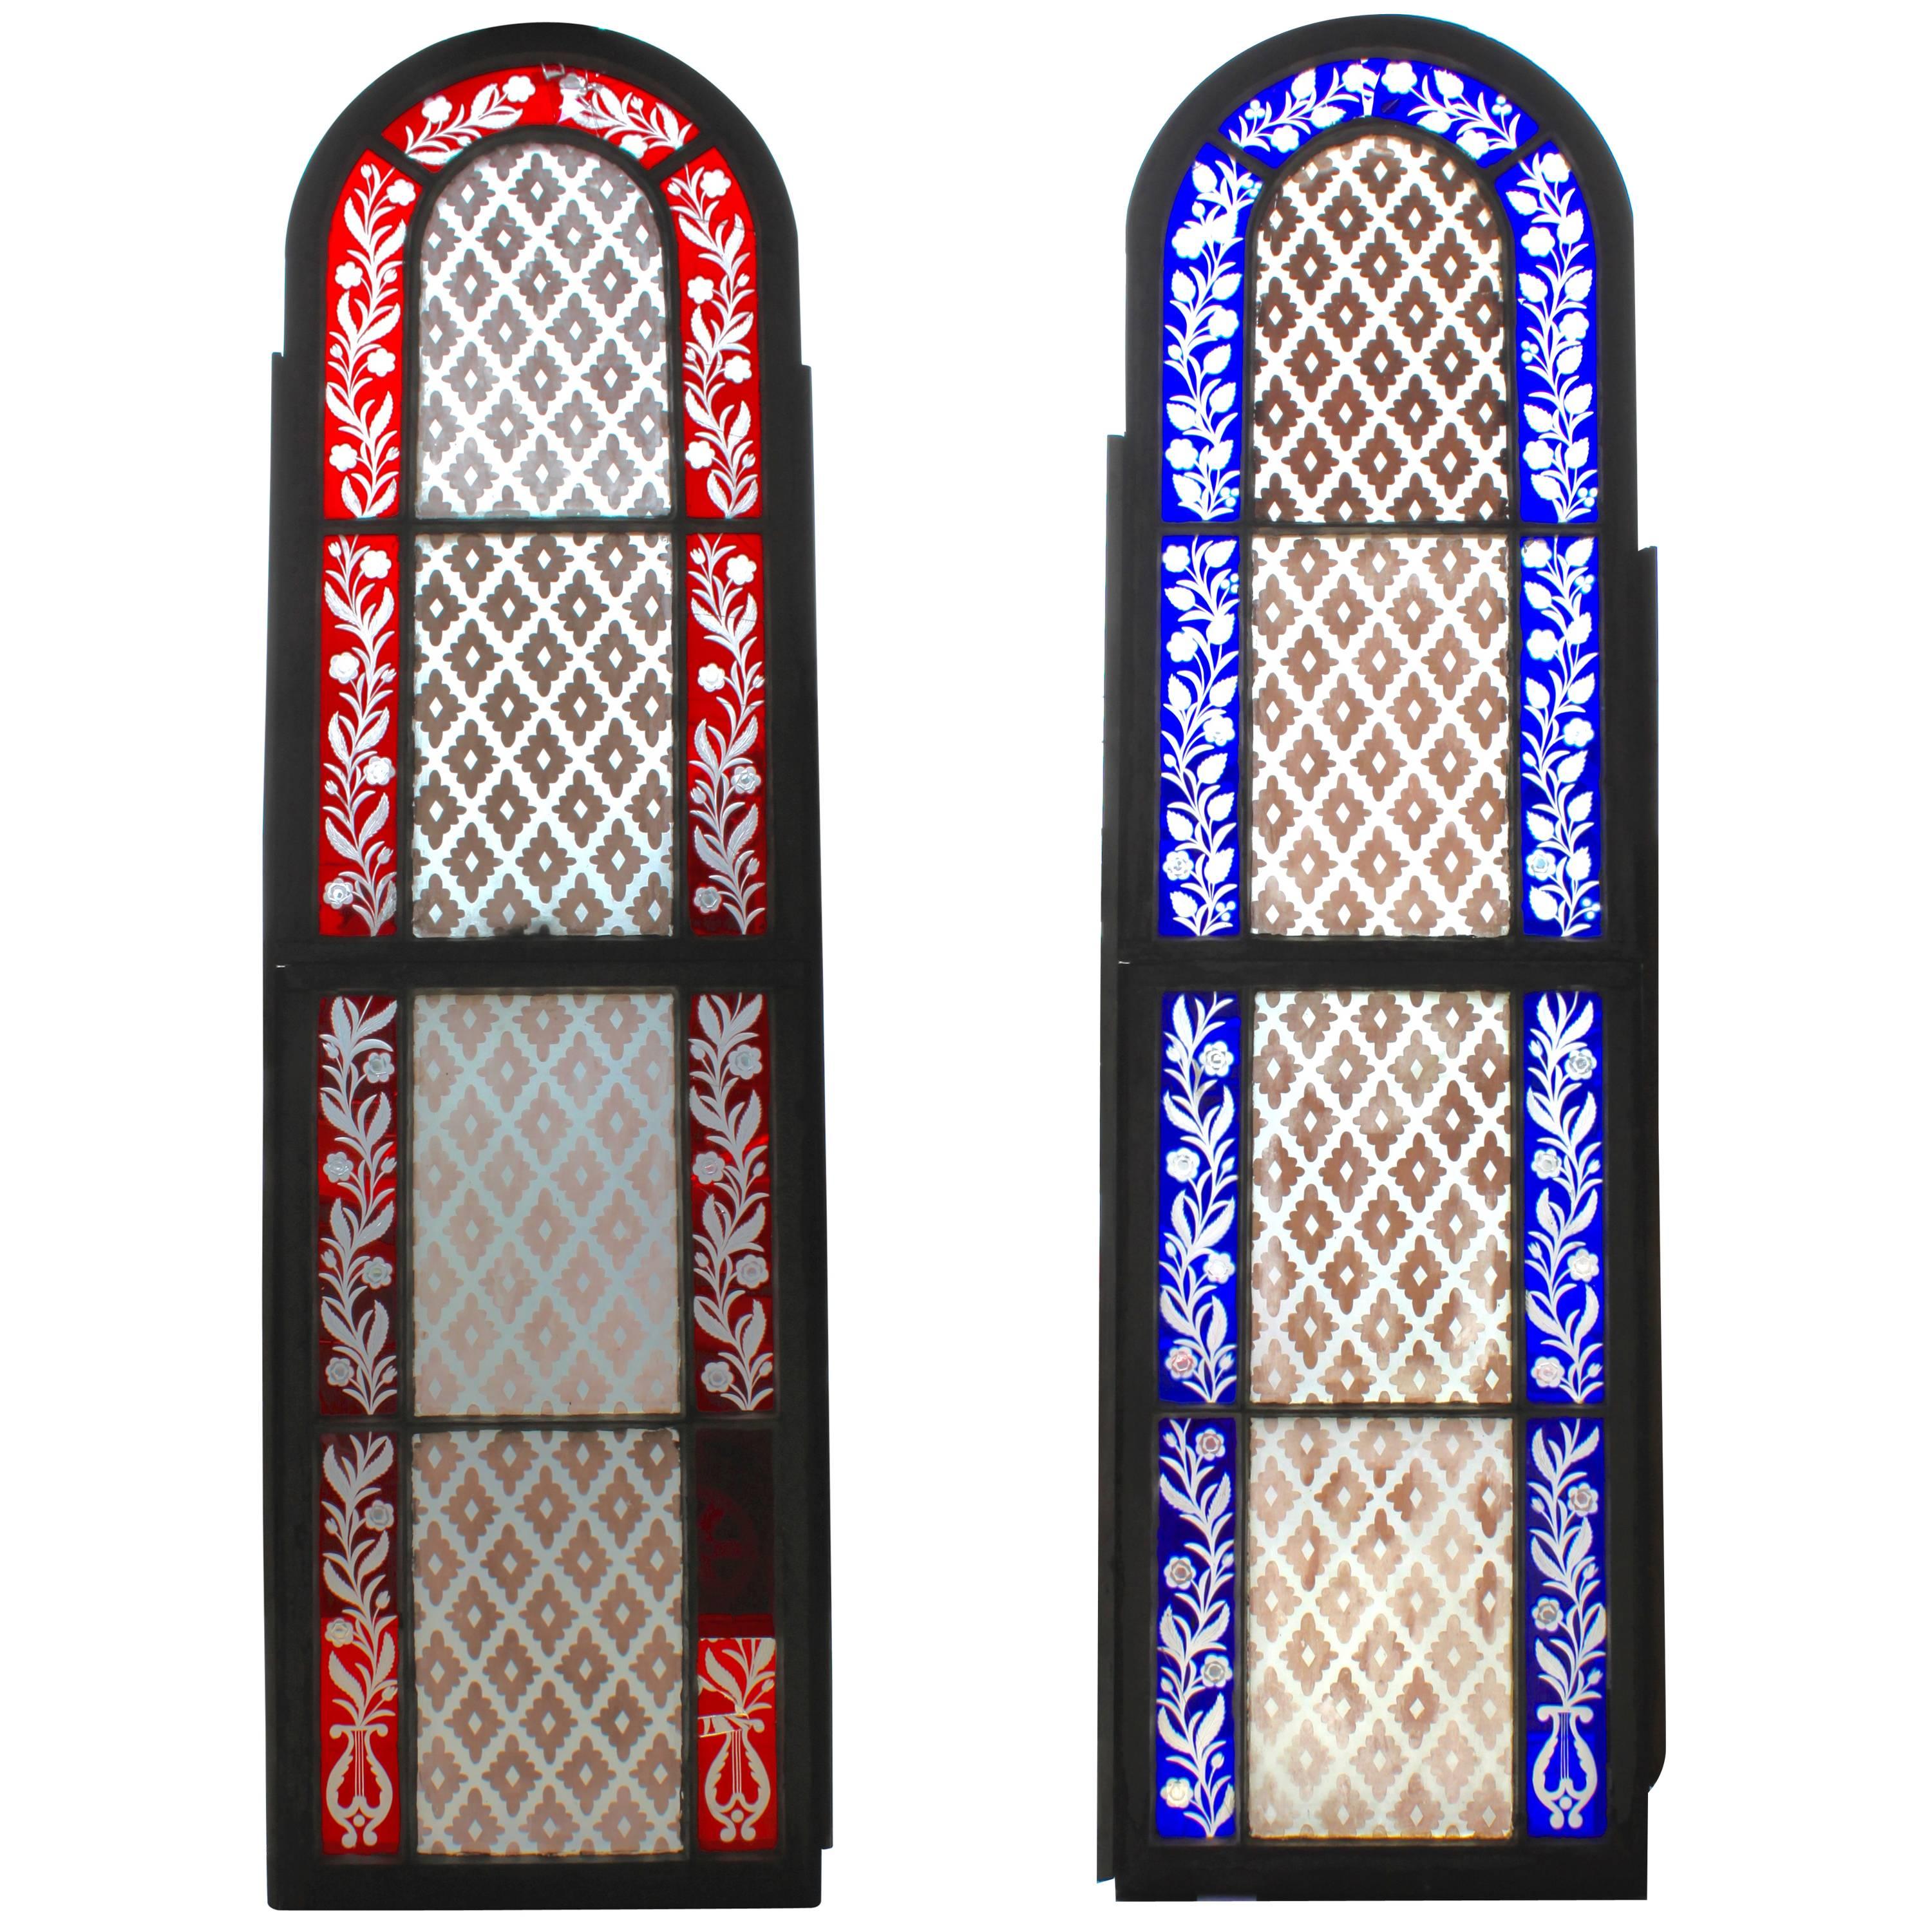 Pair of Mid-19th Century American Stained Glass Windows For Sale